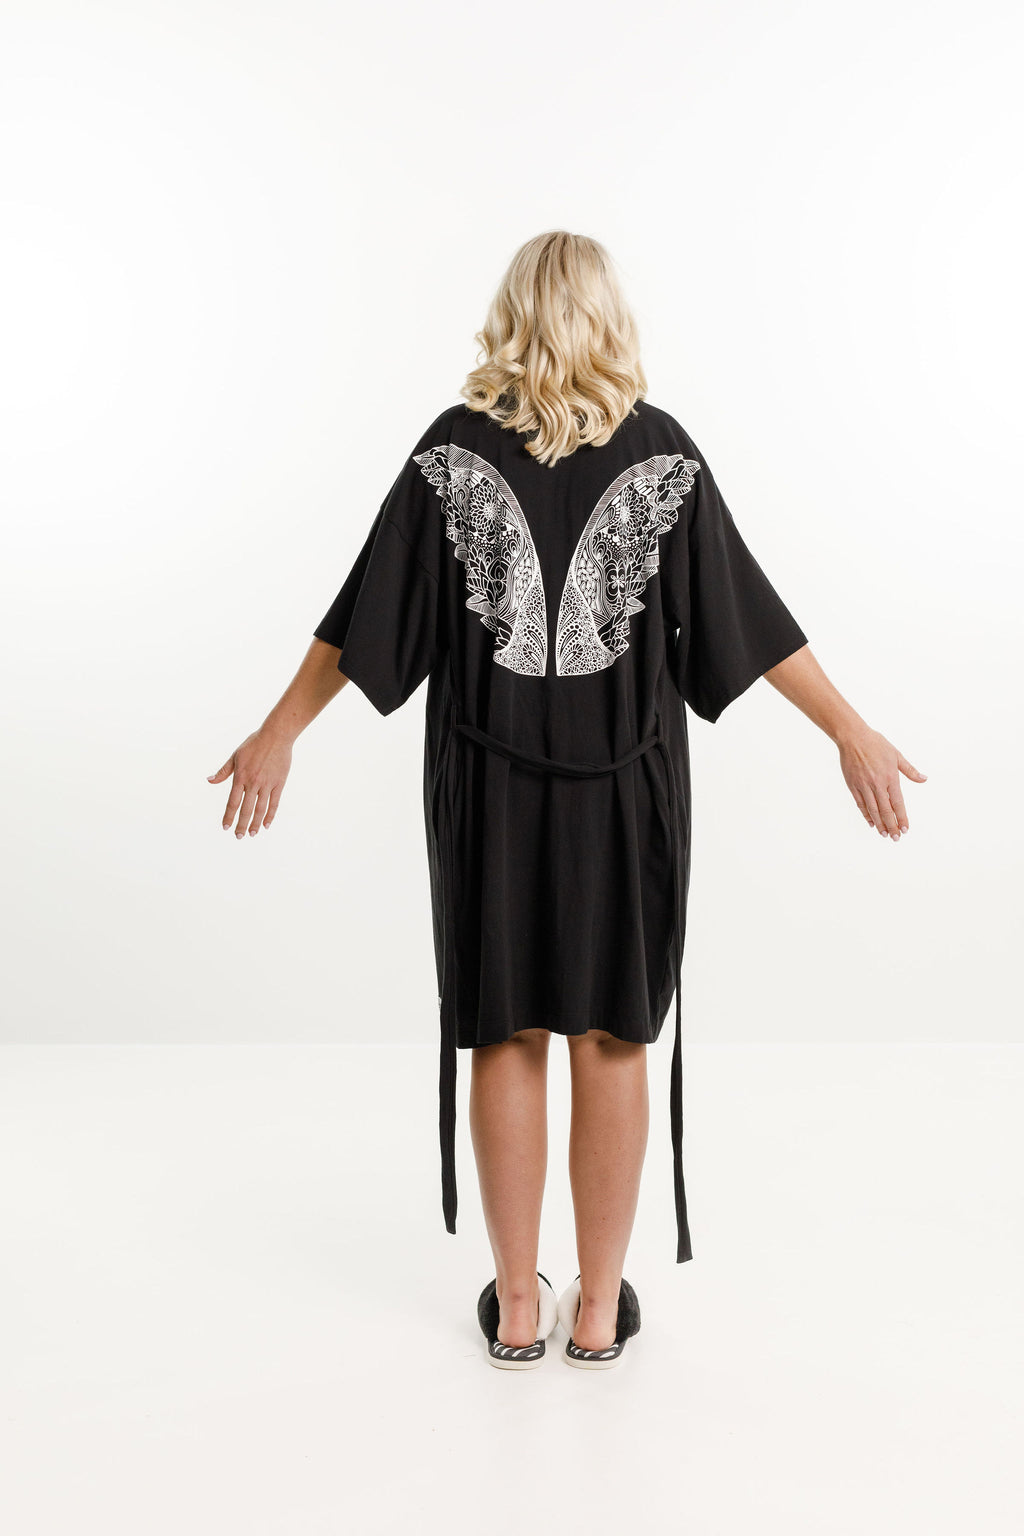 Short Robe - Black with White Wings